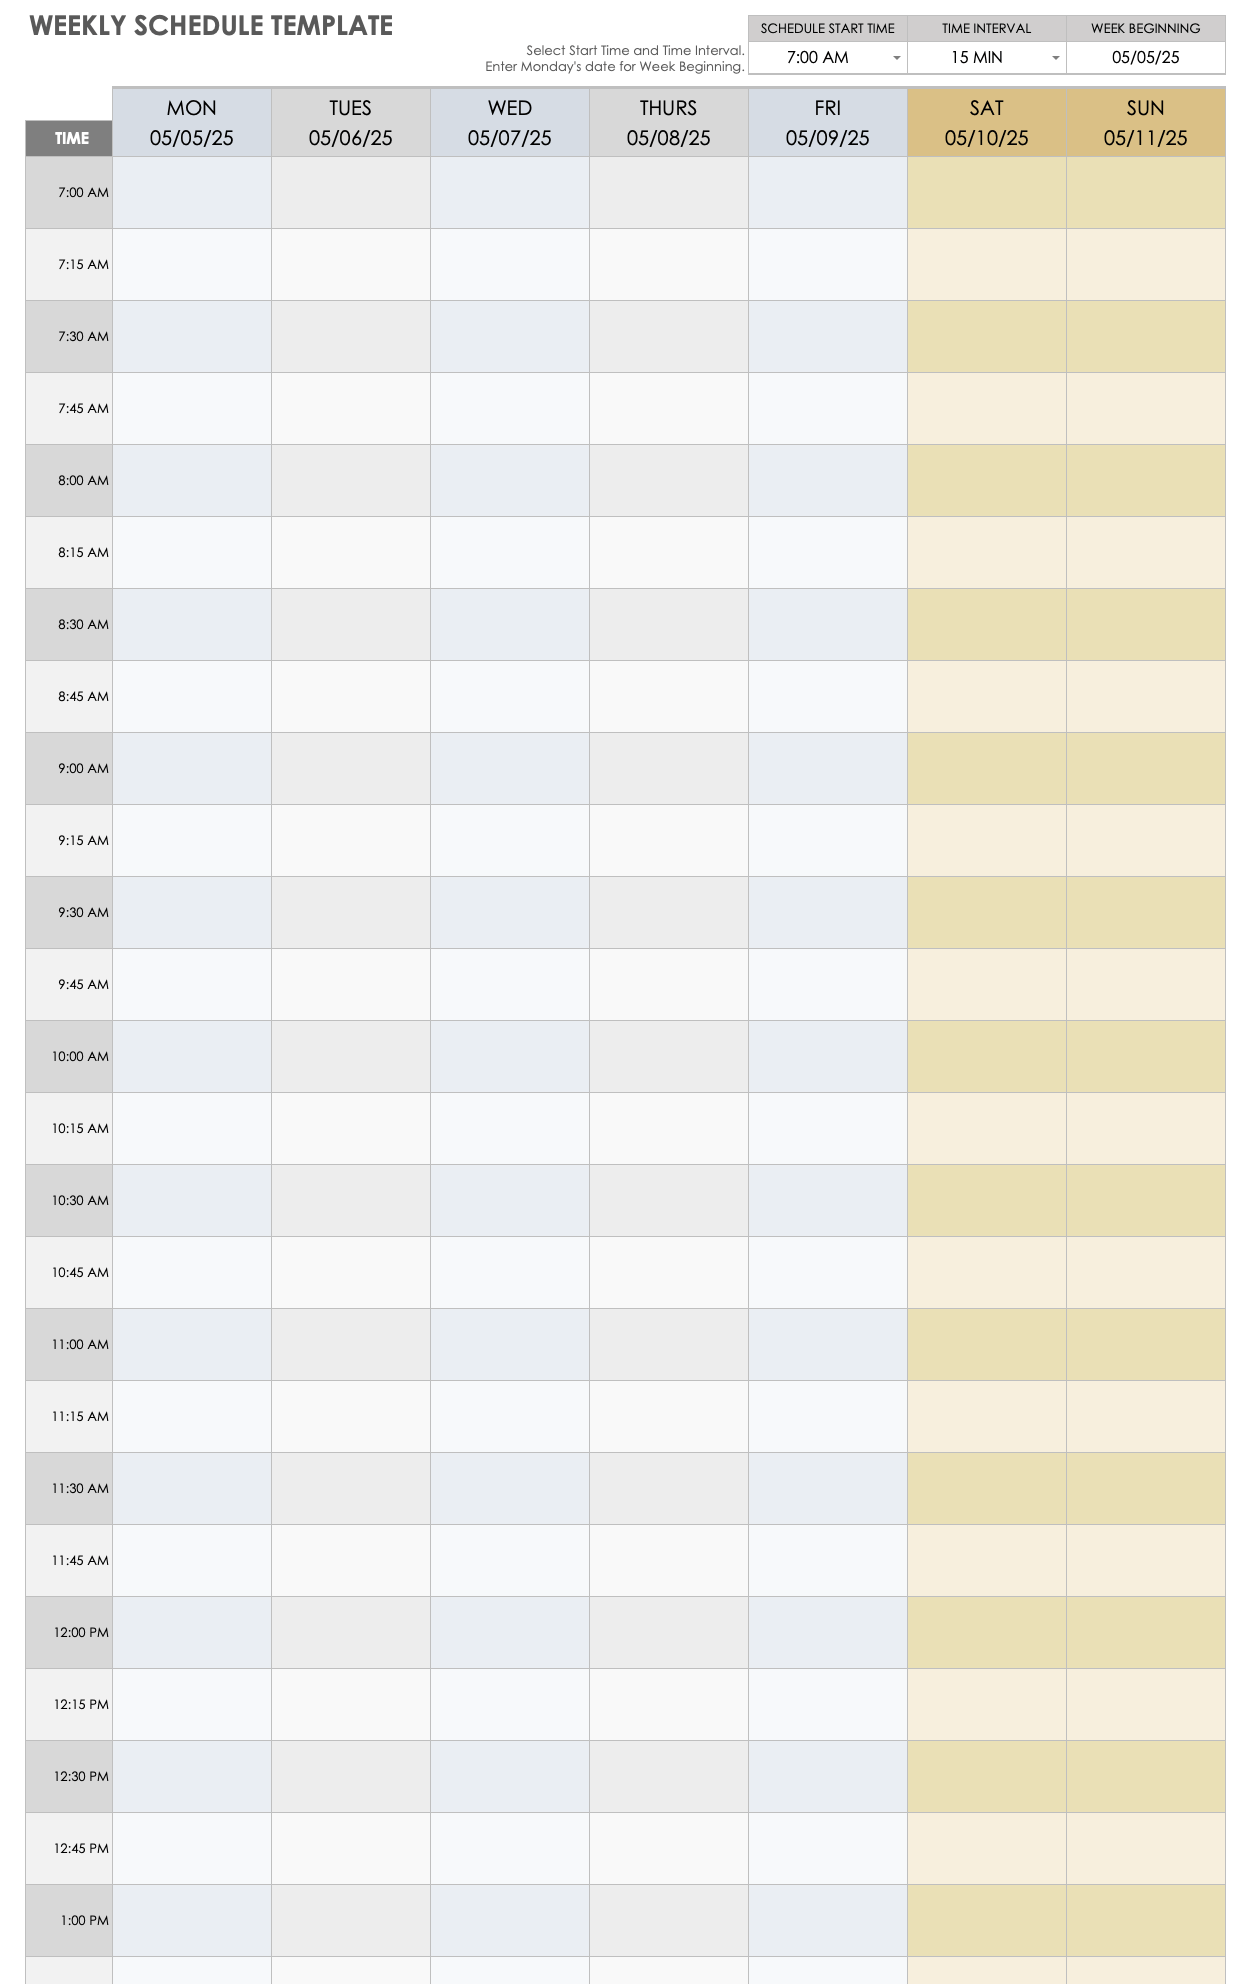 Master Schedule Template Google Sheets